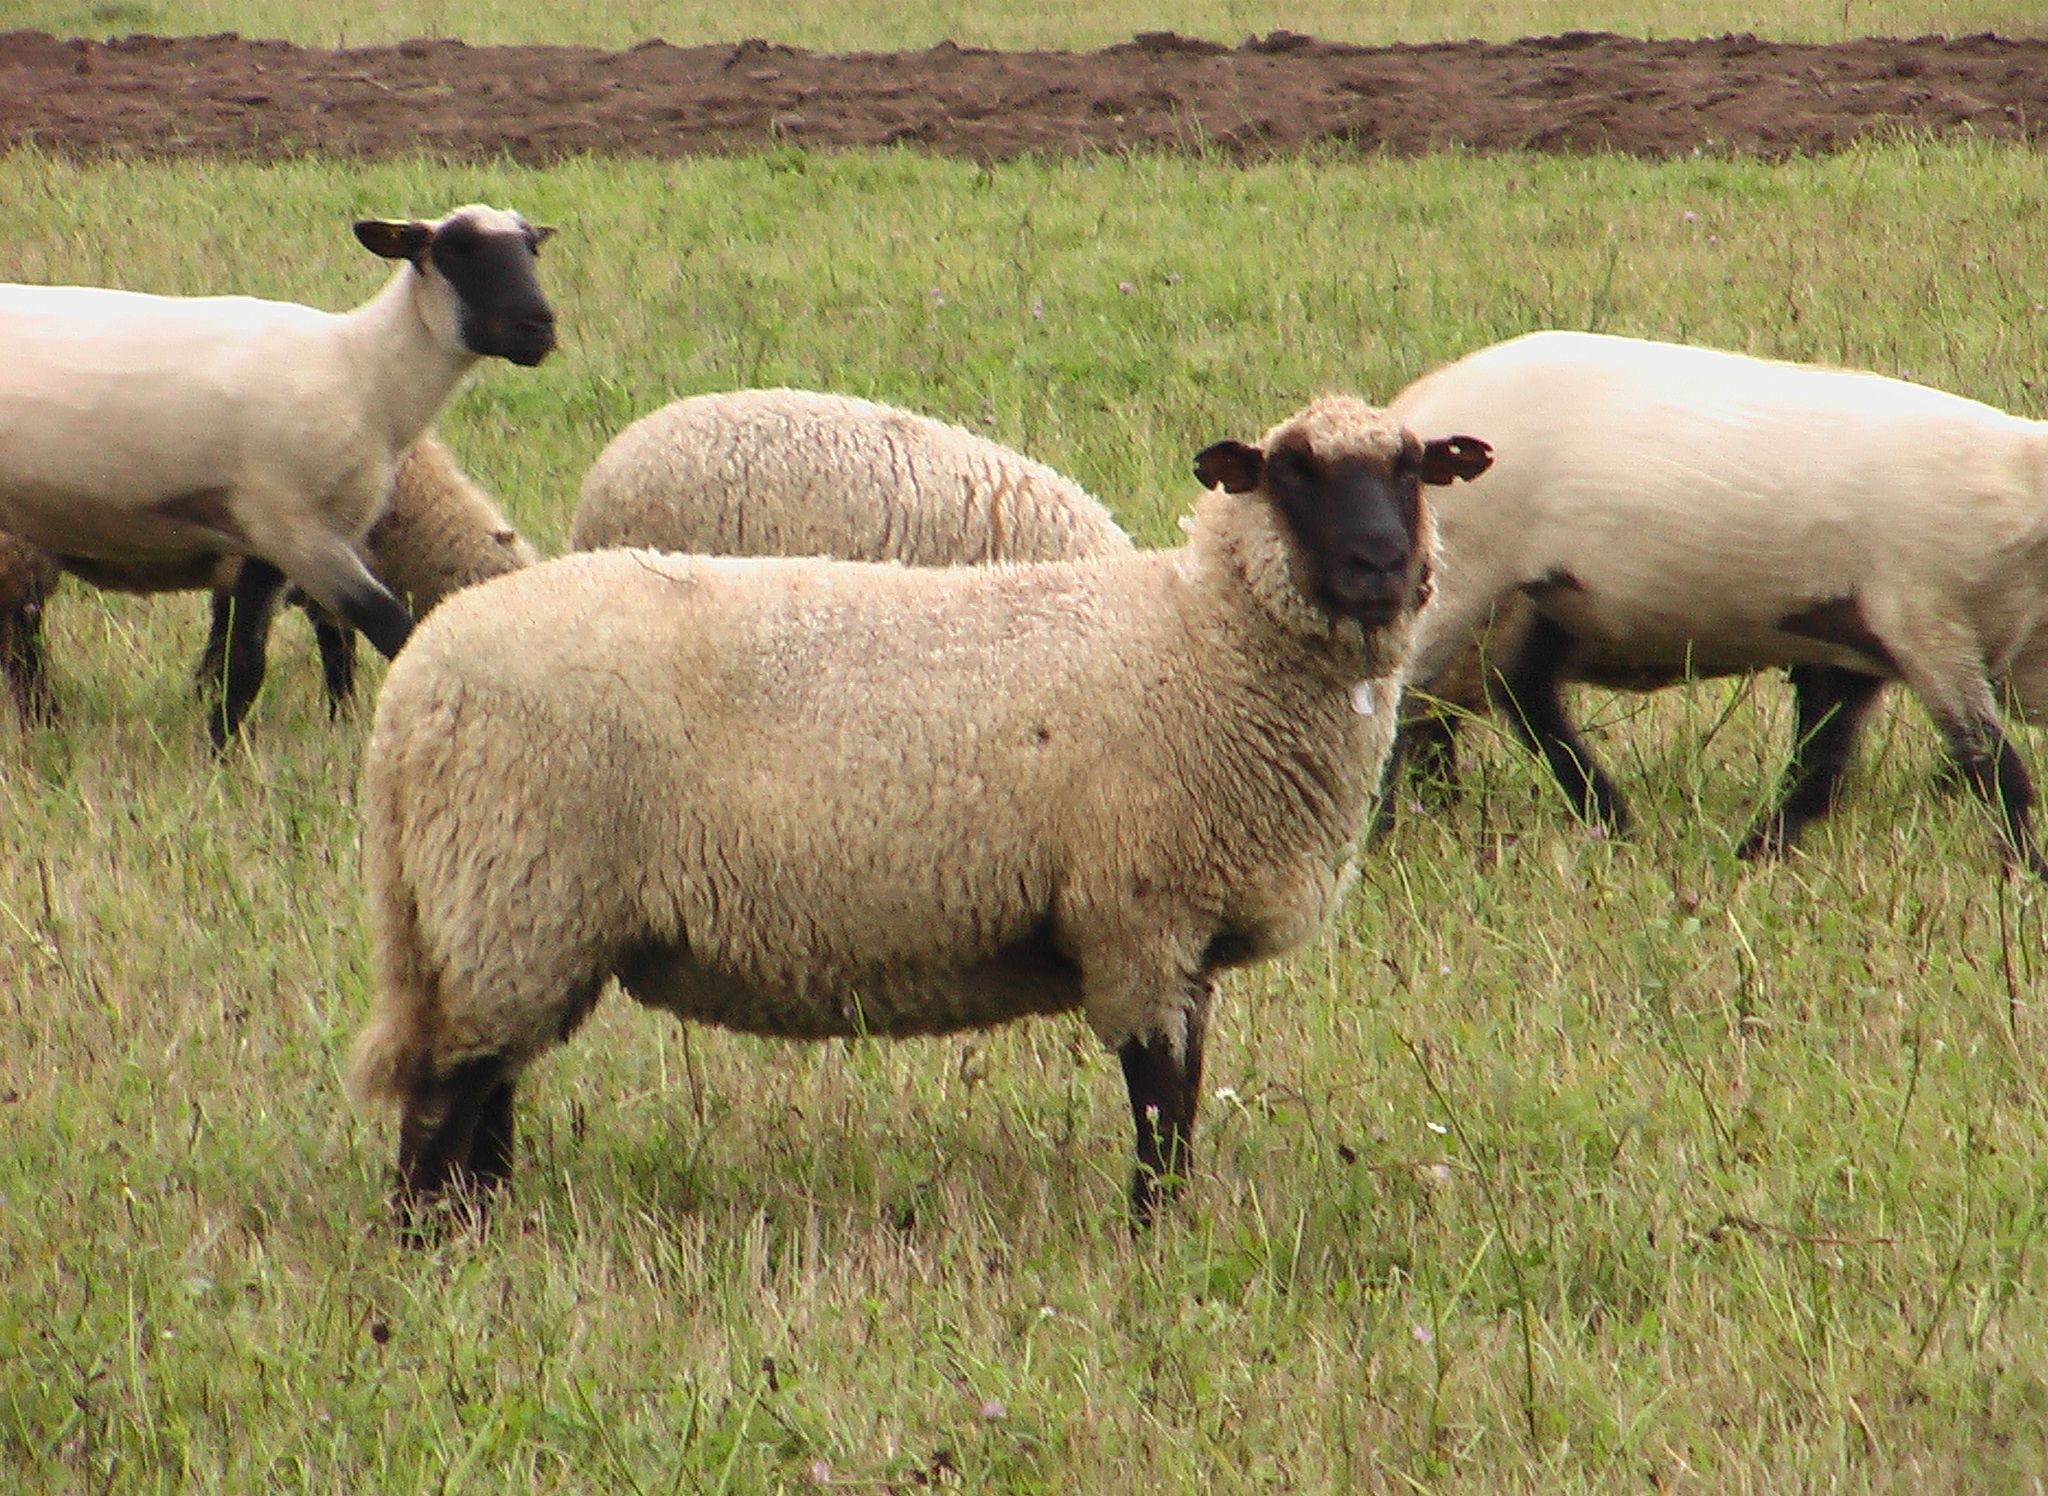 Lietuvos juodgalvės avys - Lithuanian Blackface sheep, image found here on the website of the Lithuanian farm animal genetic resources coordination centre 